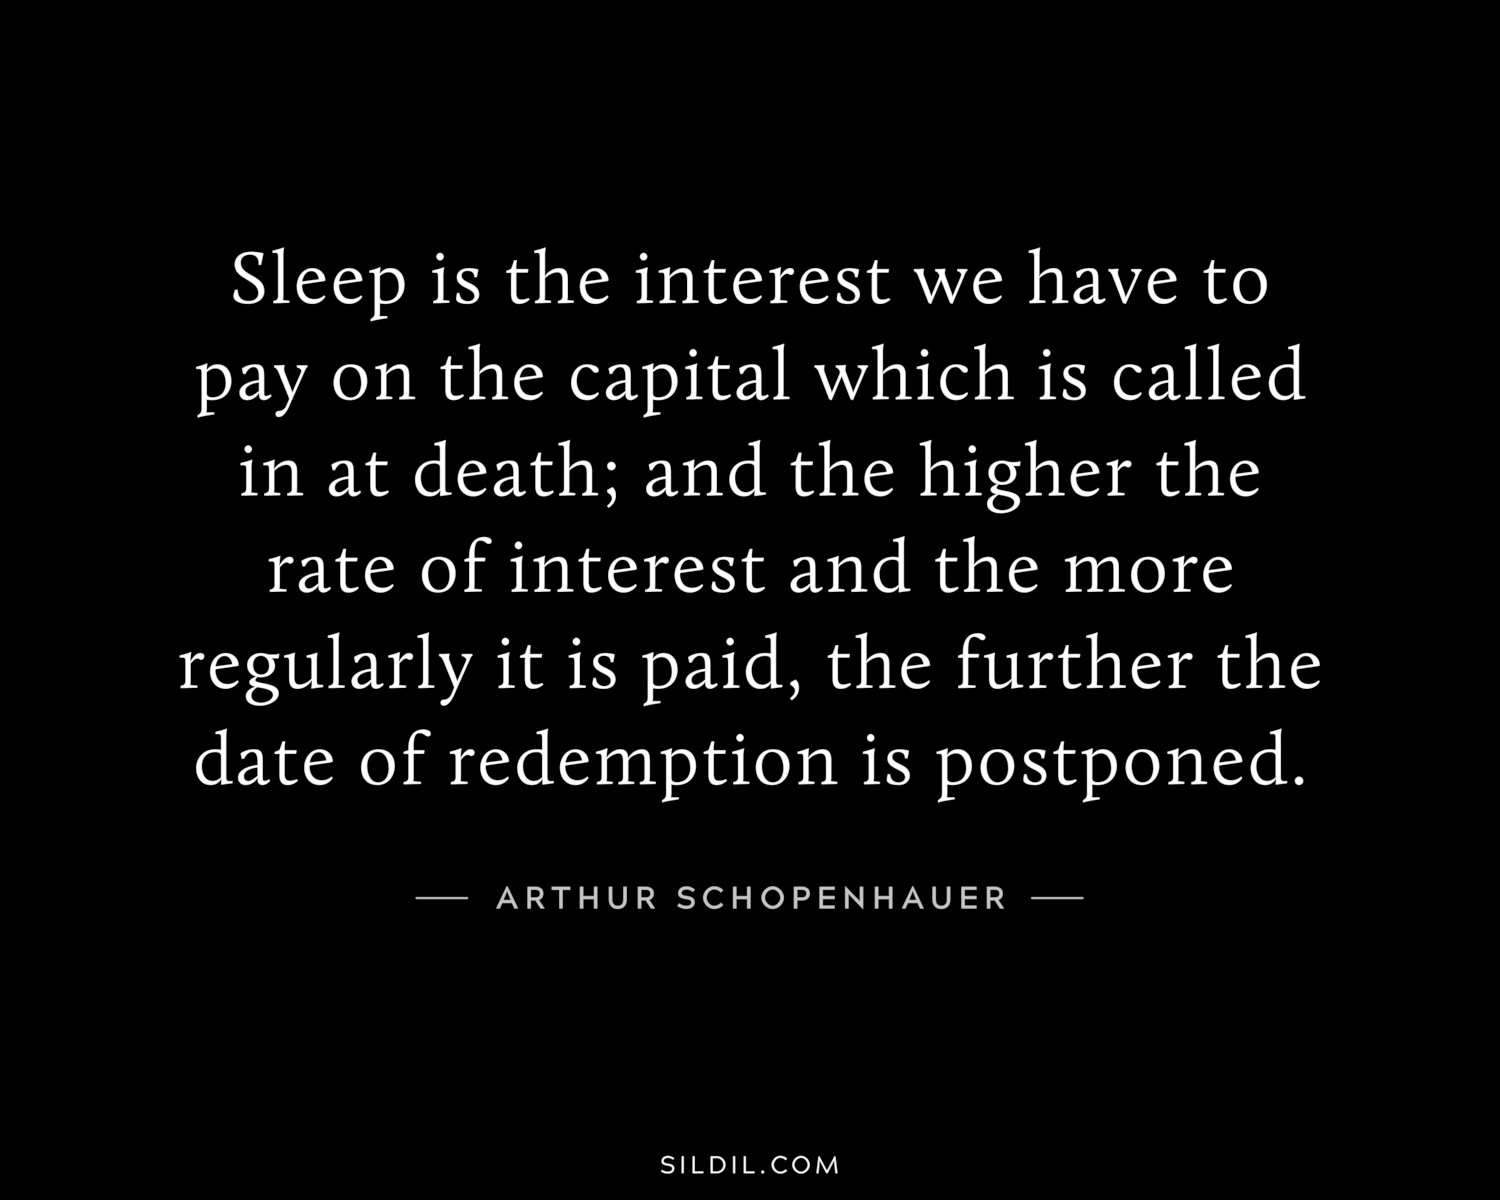 Sleep is the interest we have to pay on the capital which is called in at death; and the higher the rate of interest and the more regularly it is paid, the further the date of redemption is postponed.